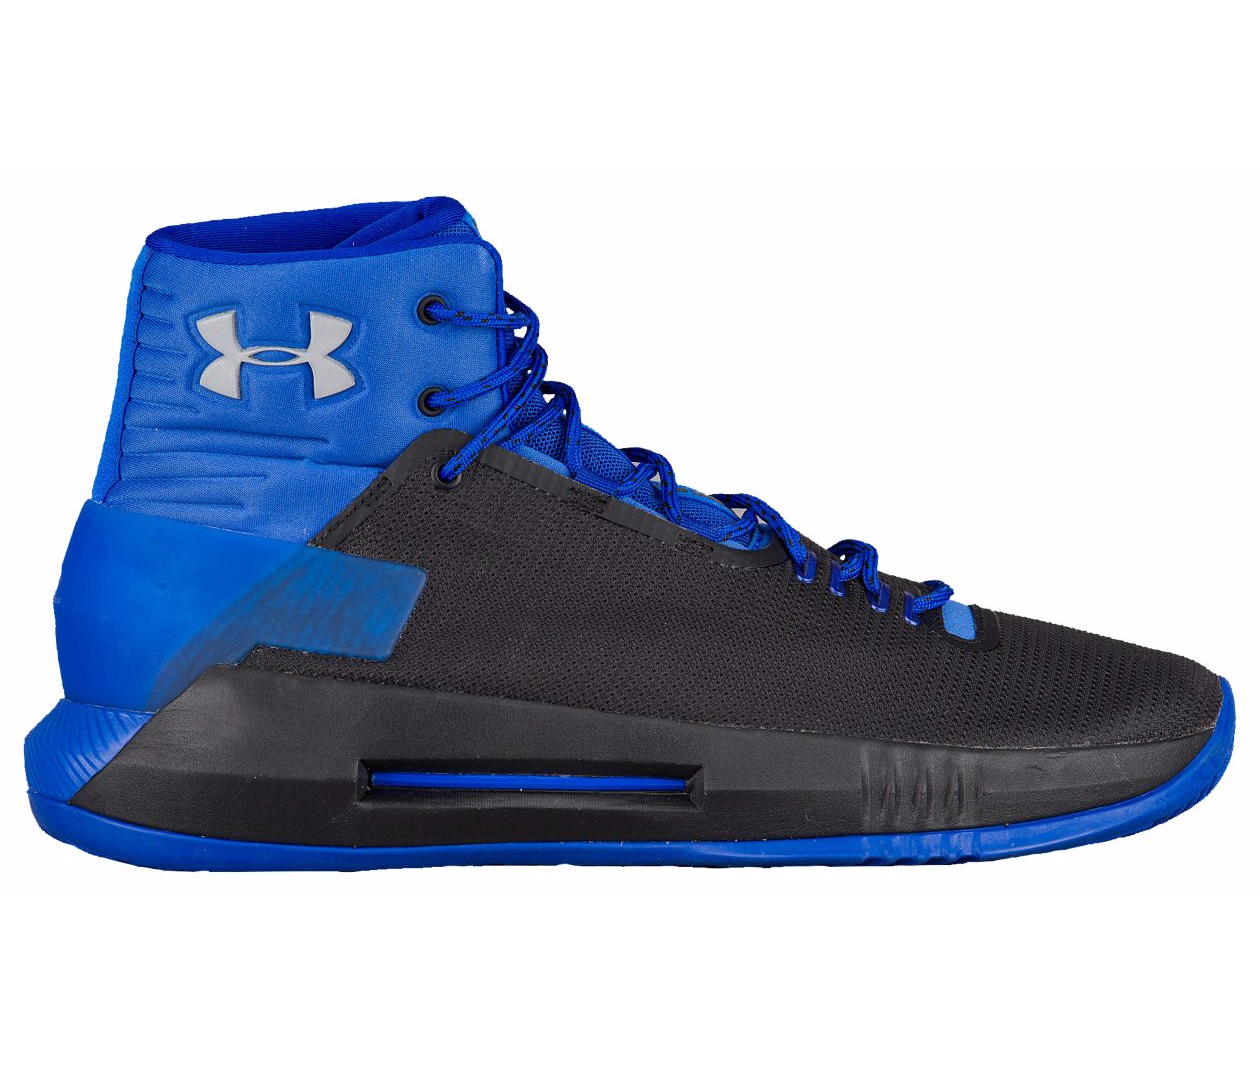 Colorways of the Under Armour Drive 